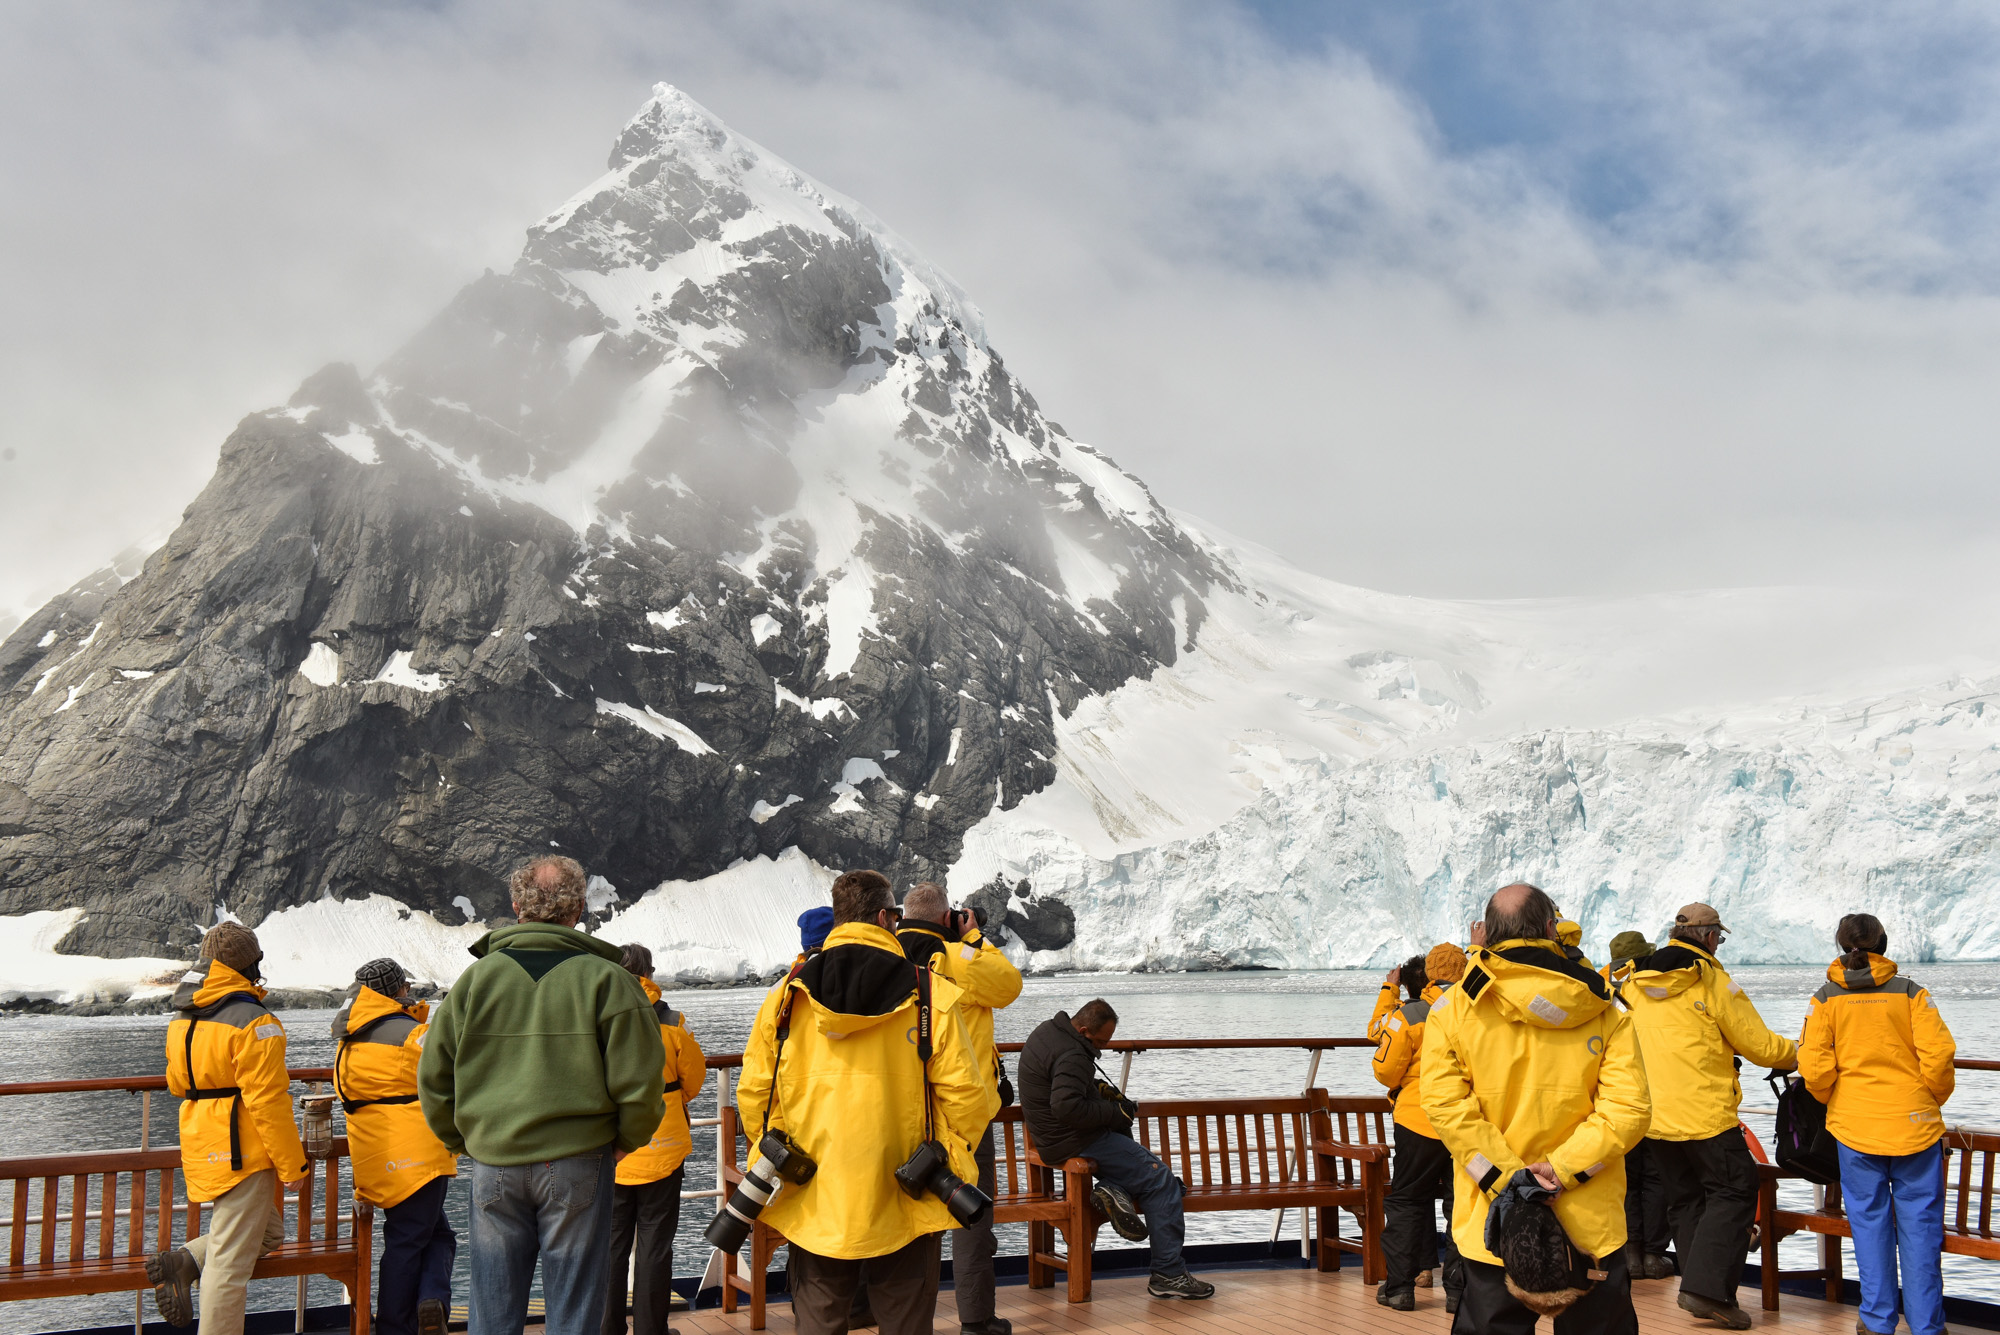 Passengers marvel at the sheer scale of Point Wild, an important Antarctic historic site.